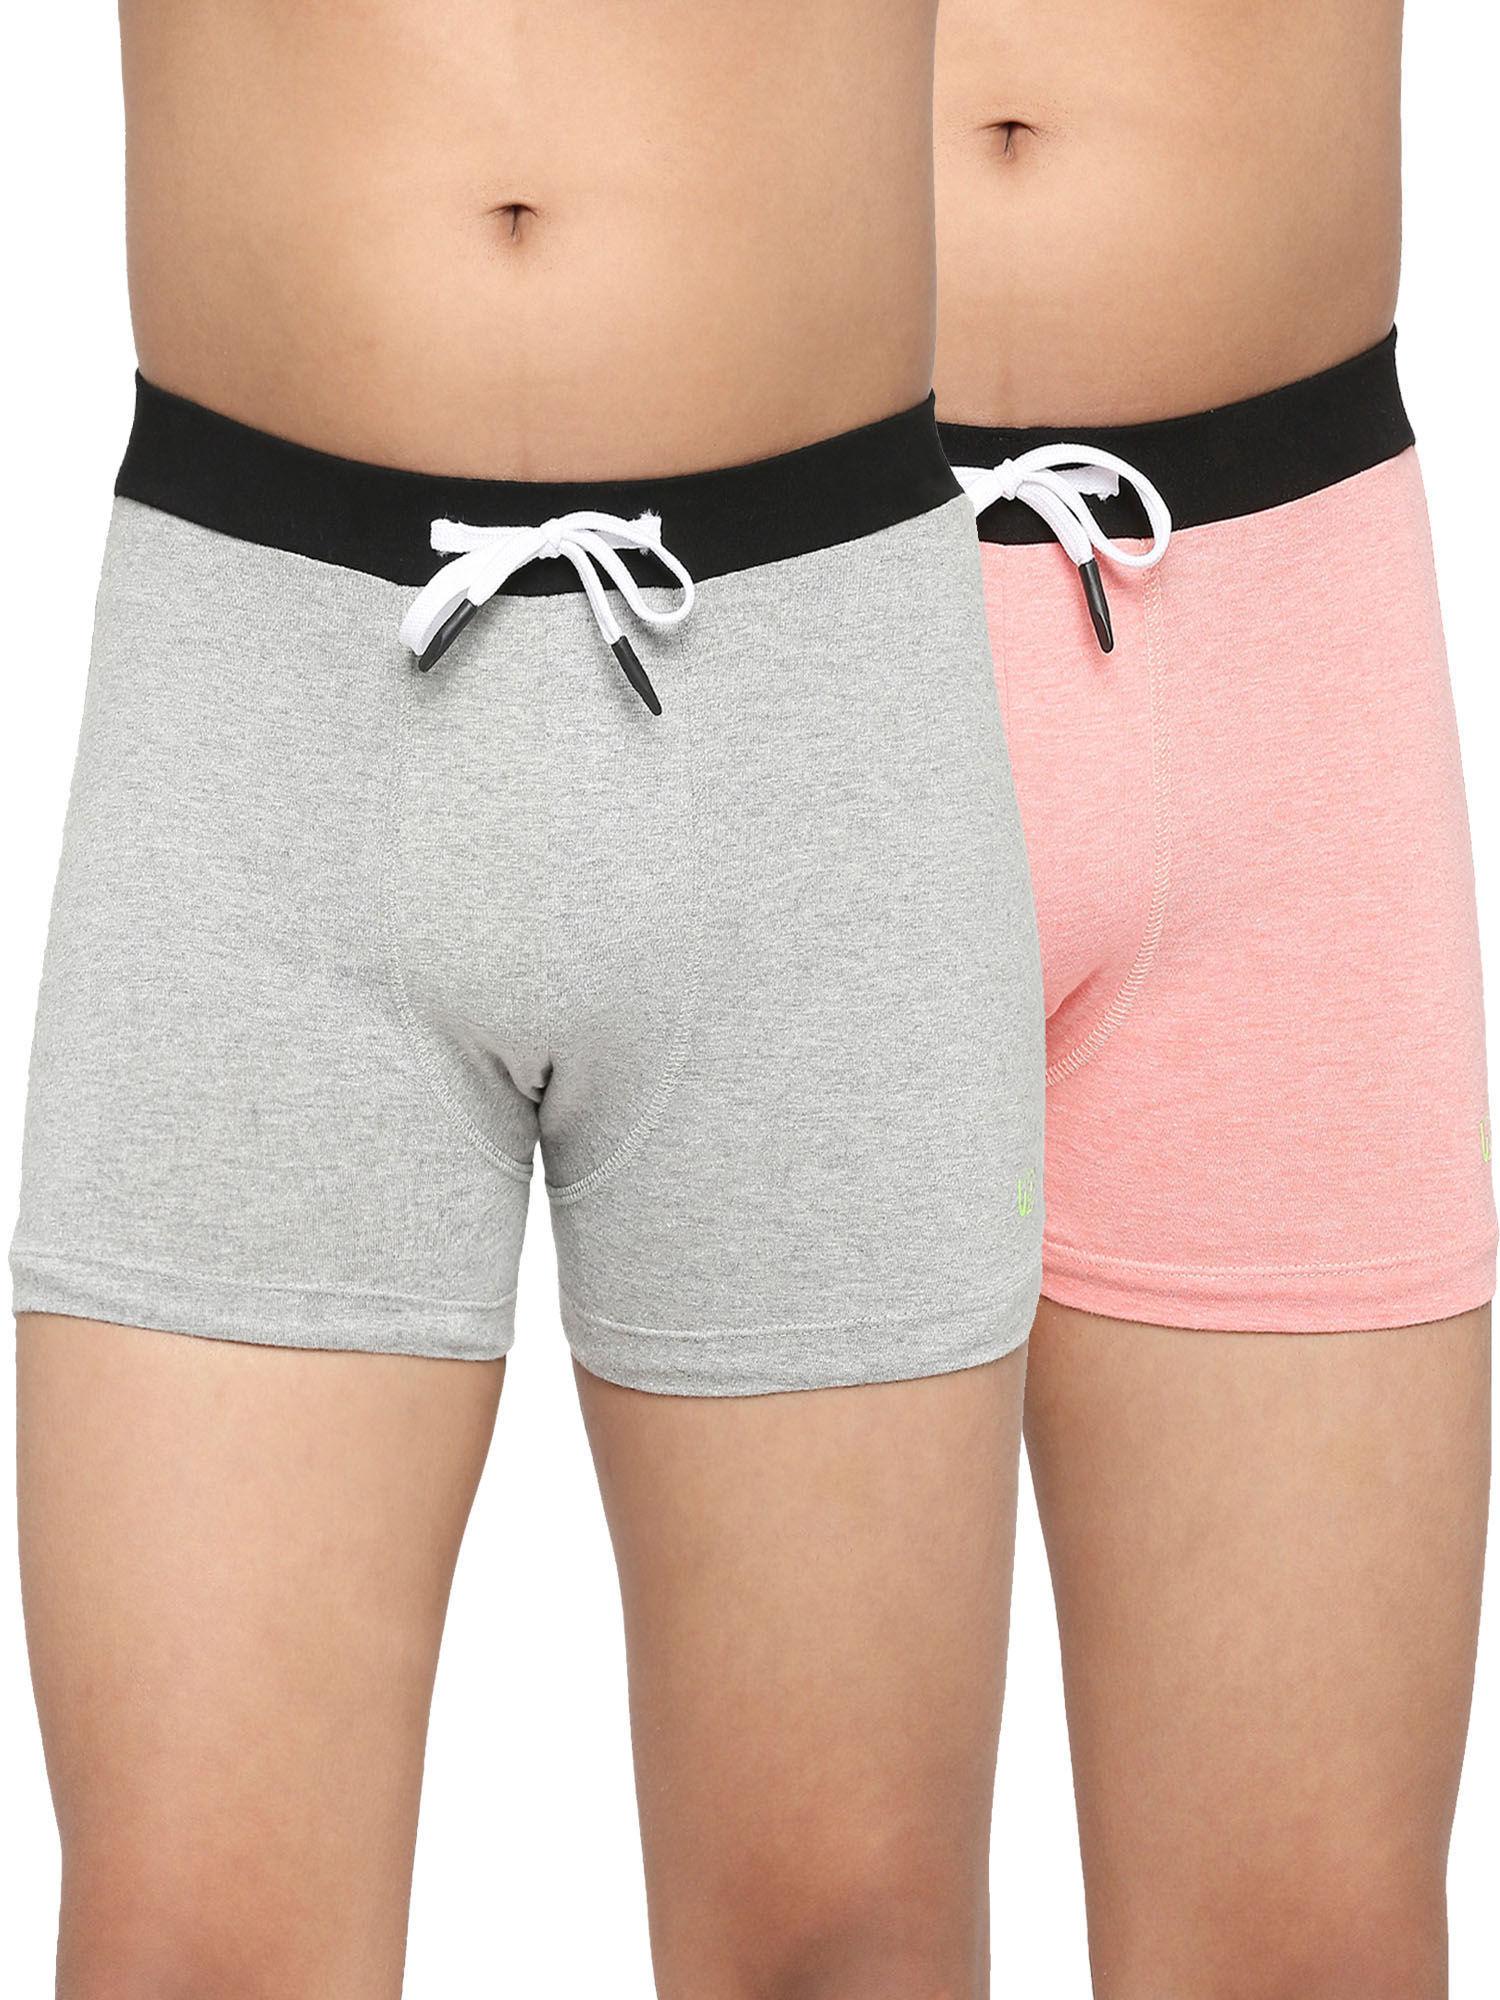 teenagers-cotton-trunk-light-grey-and-pink-(pack-of-2)